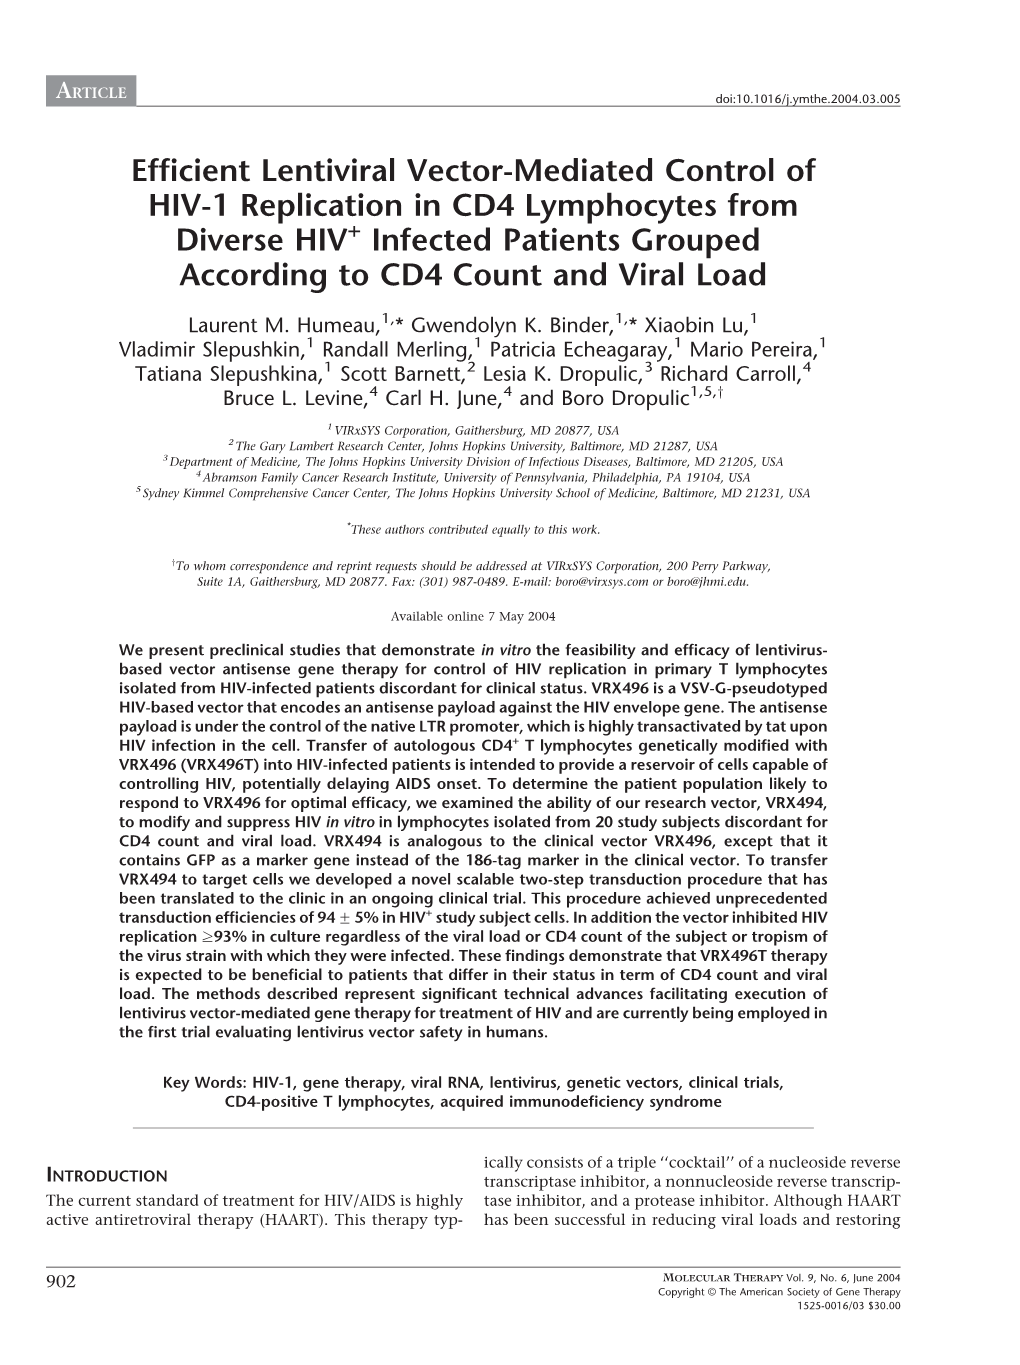 Efficient Lentiviral Vector-Mediated Control of HIV-1 Replication in CD4 Lymphocytes from Diverse HIV+ Infected Patients Grouped According to CD4 Count and Viral Load